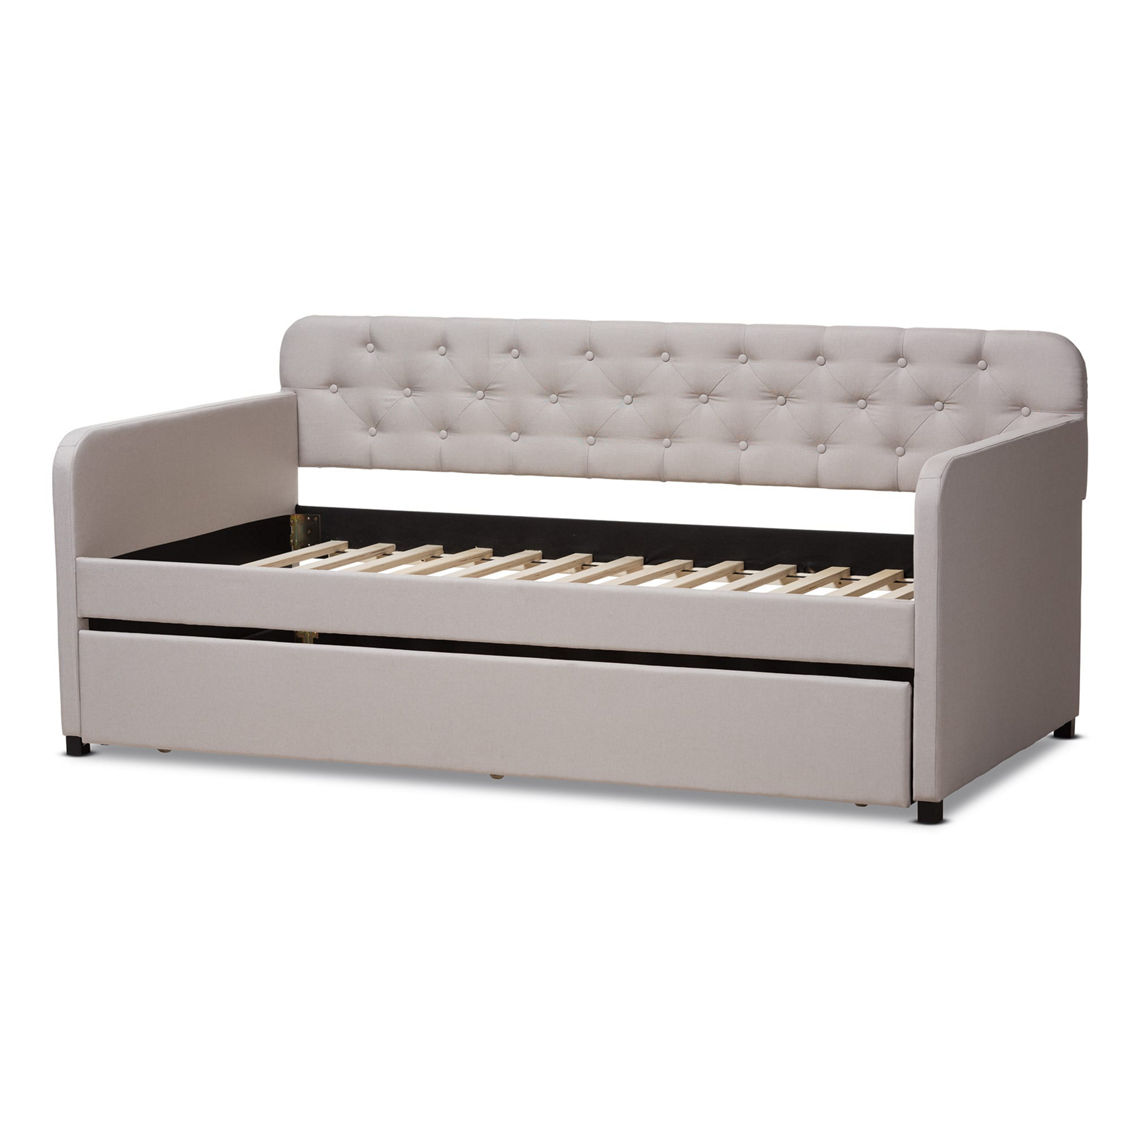 Baxton Studio Camelia Upholstered Twin Size Daybed with Trundle - Image 4 of 5